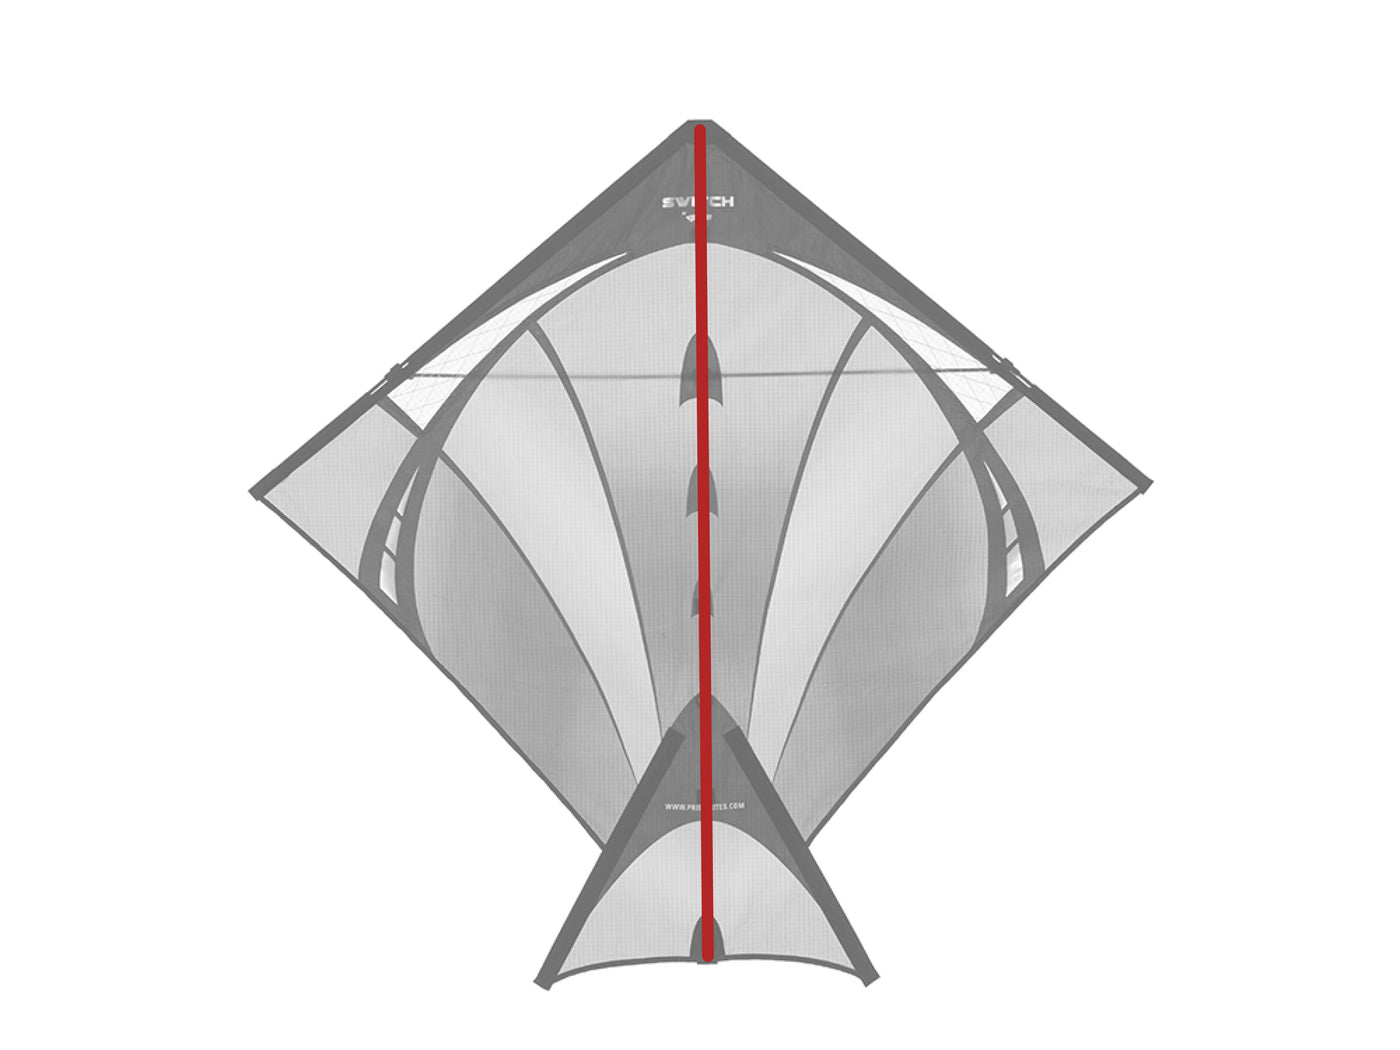 Diagram showing location of the Switch Spine on the kite.